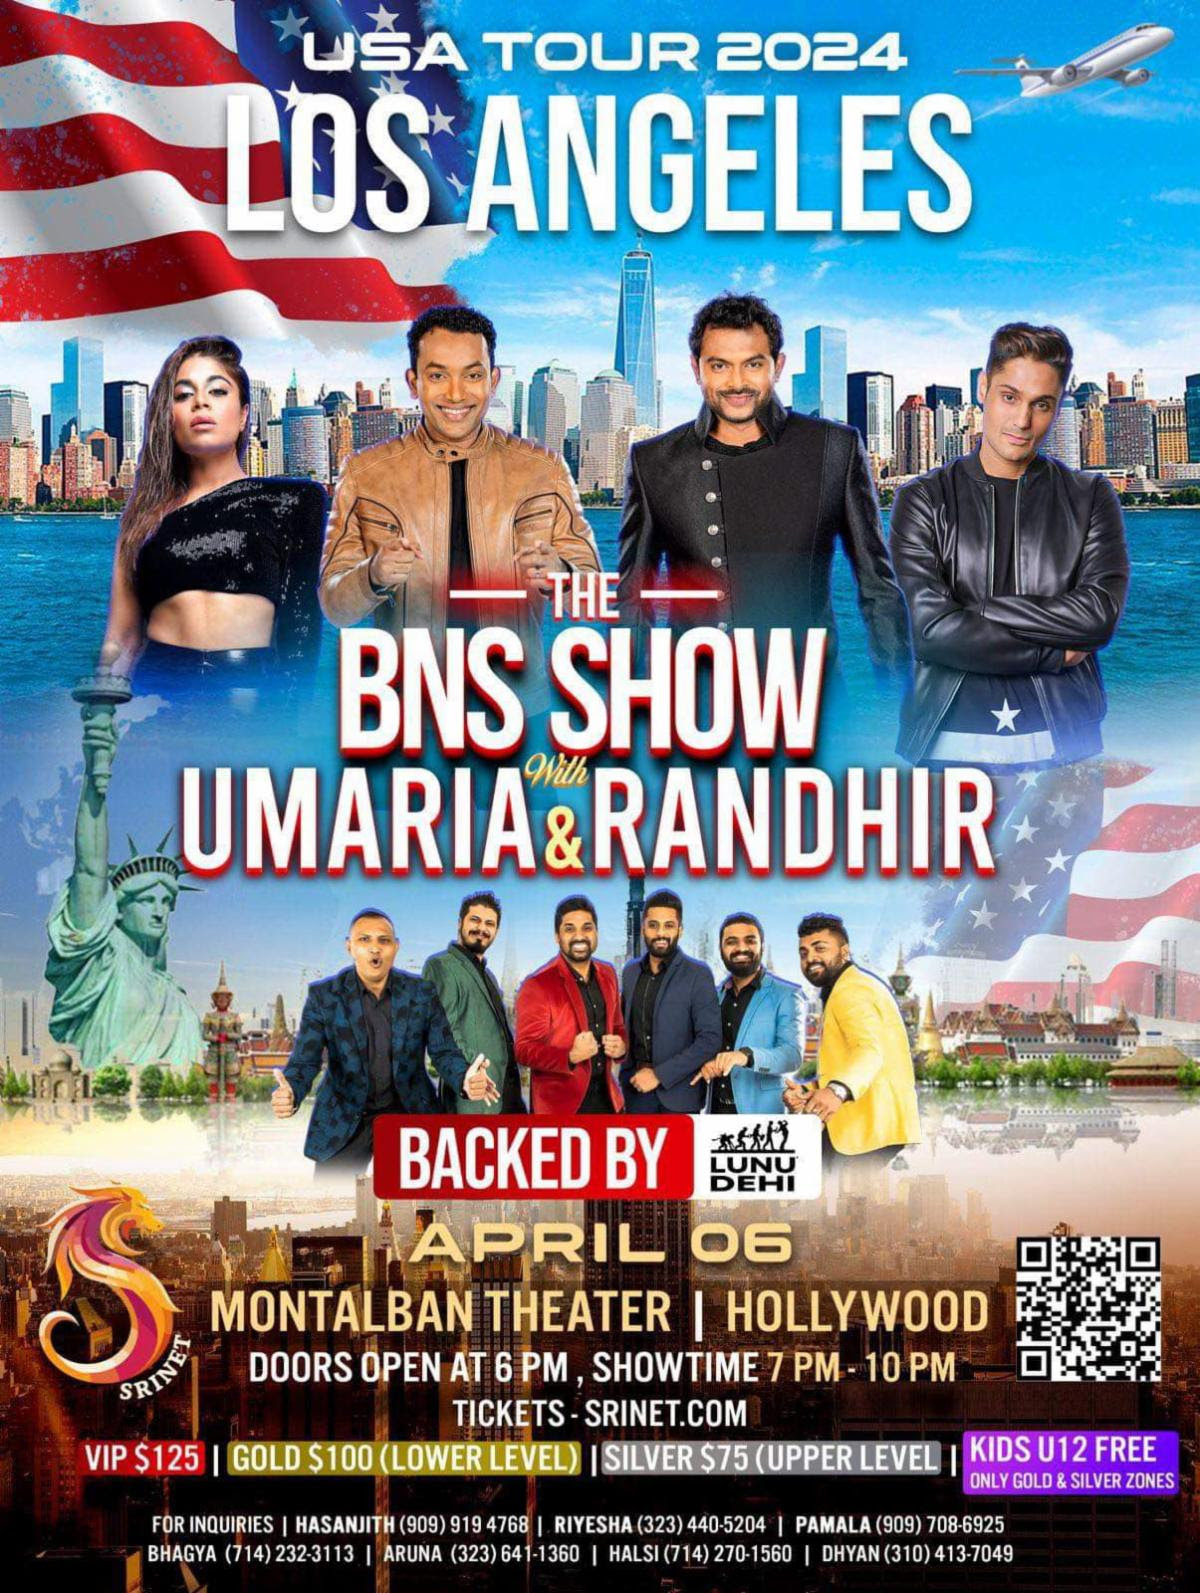 The BNS Show with Umaria and Randhir - USA Tour 2024 in Los Angeles Click on link below to purchase tickets srinet.com